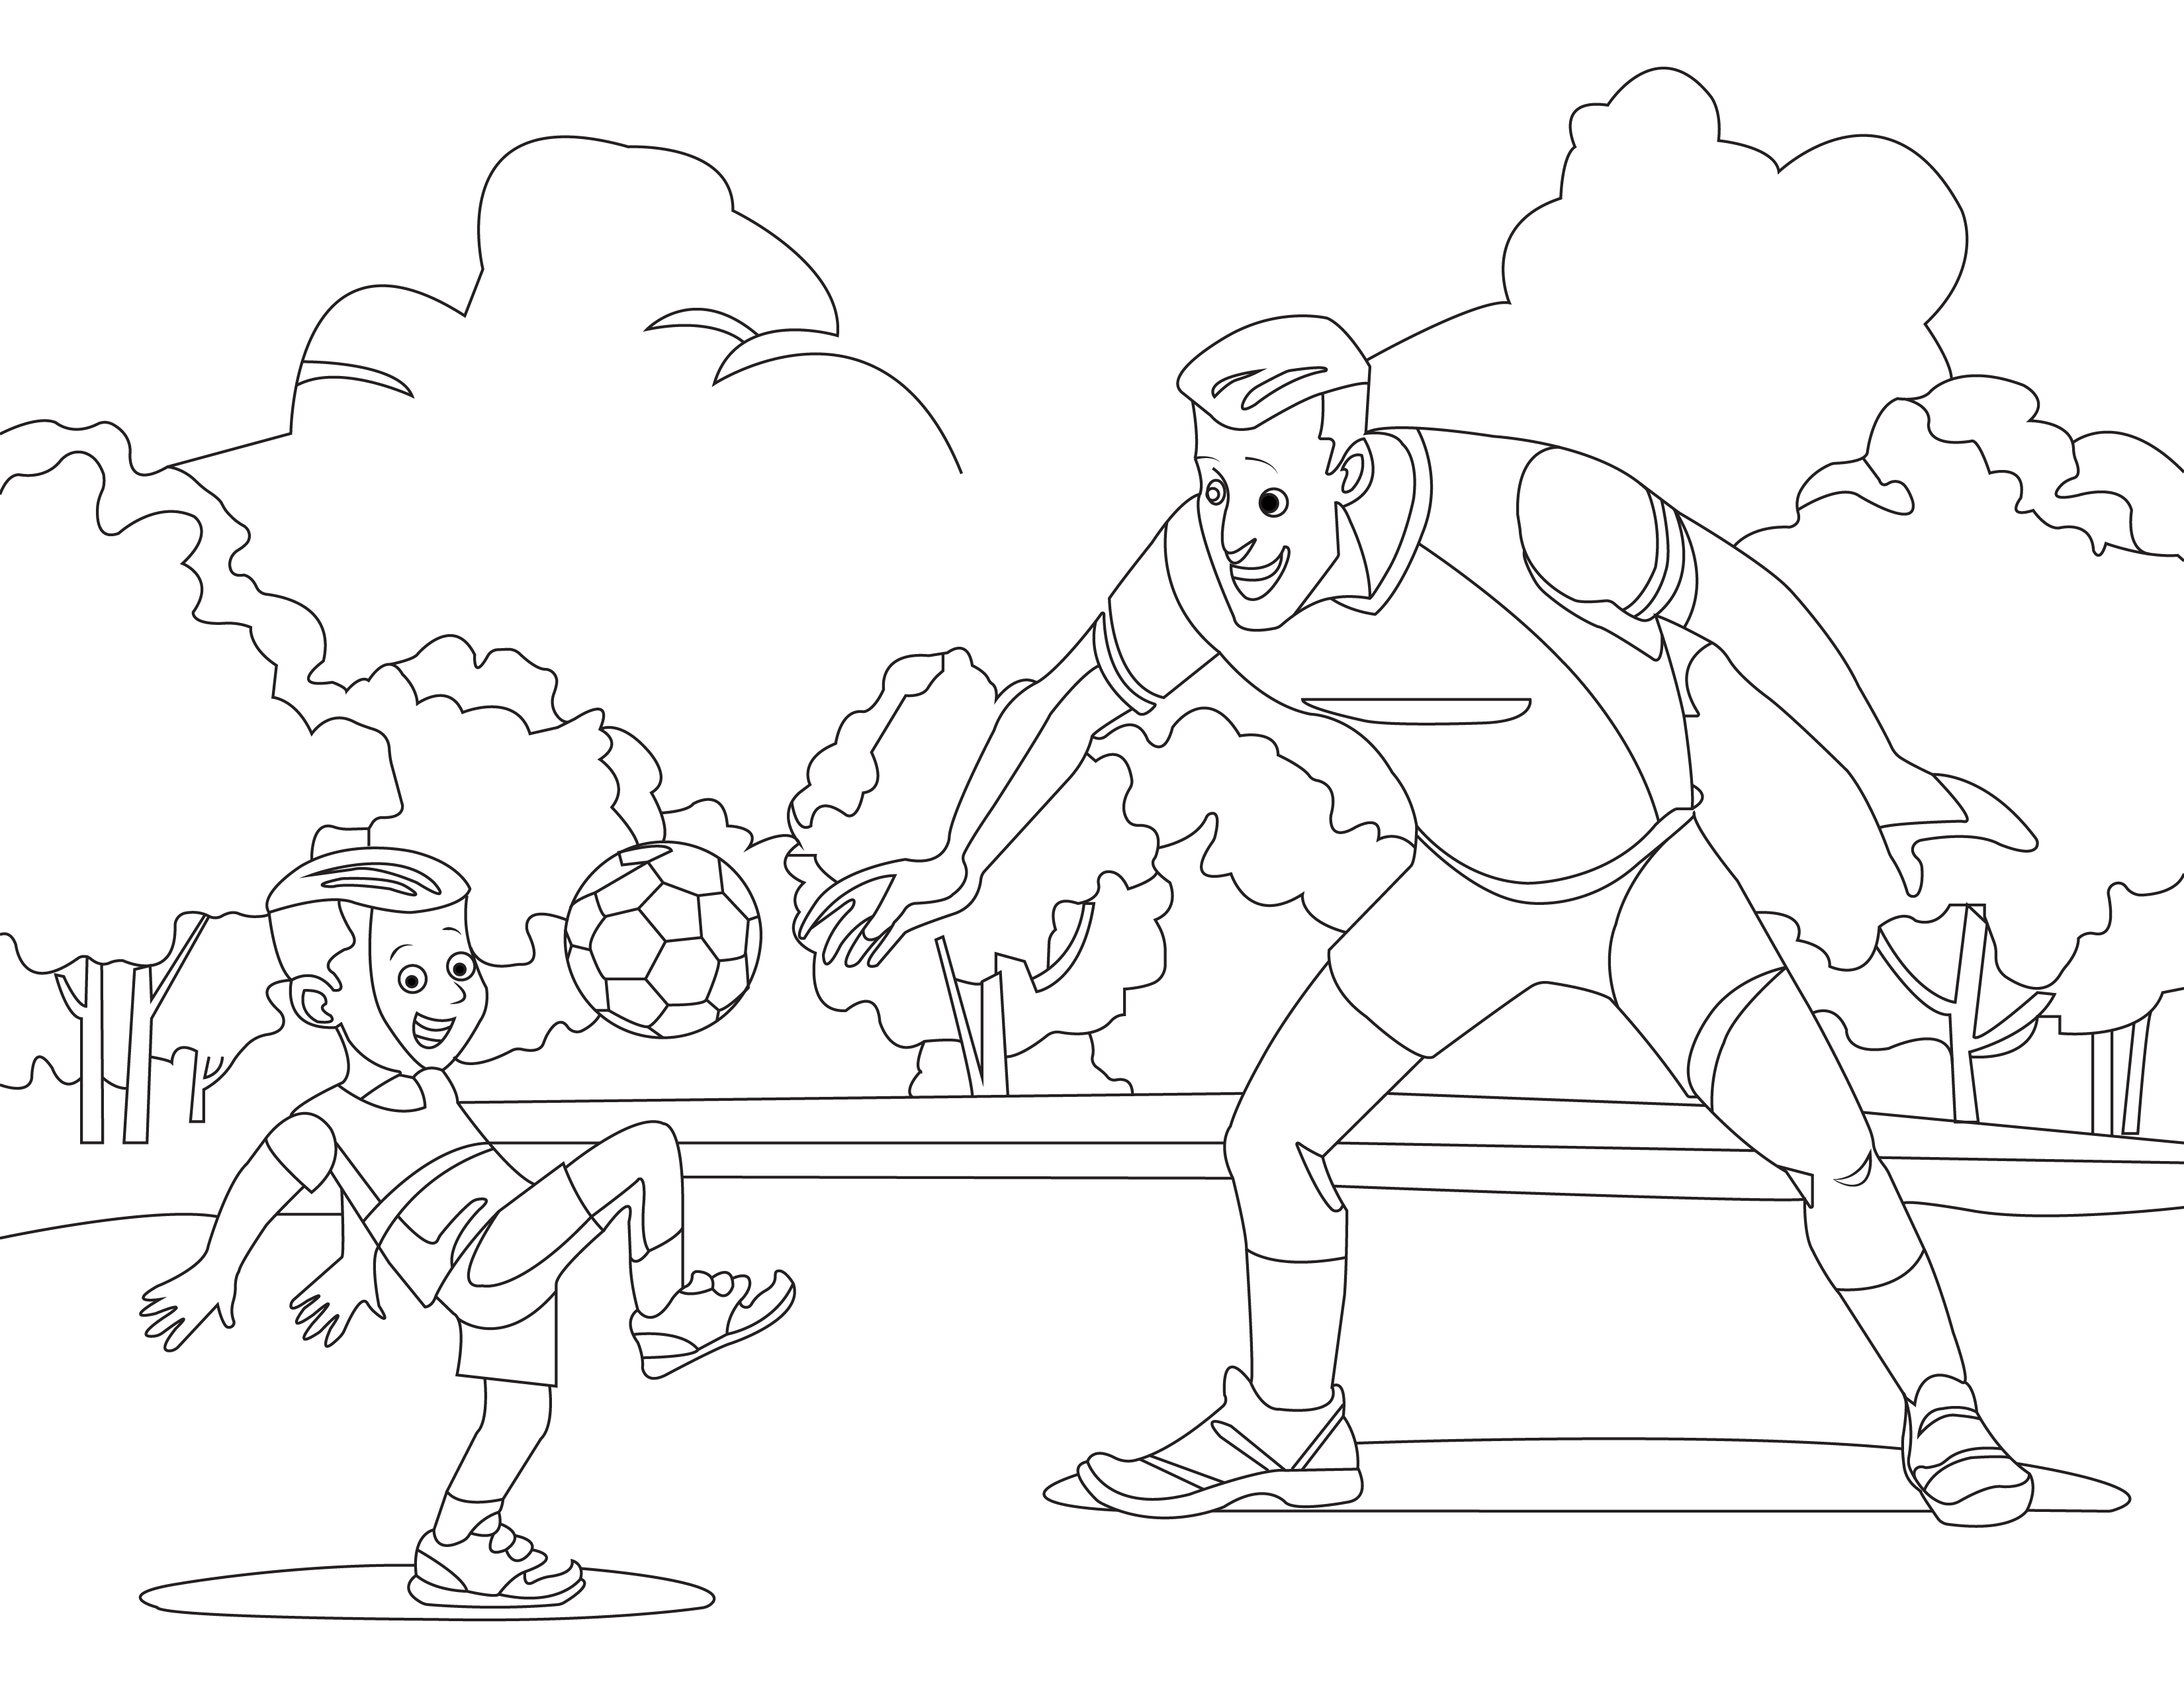 Coloring page of child playing soccer